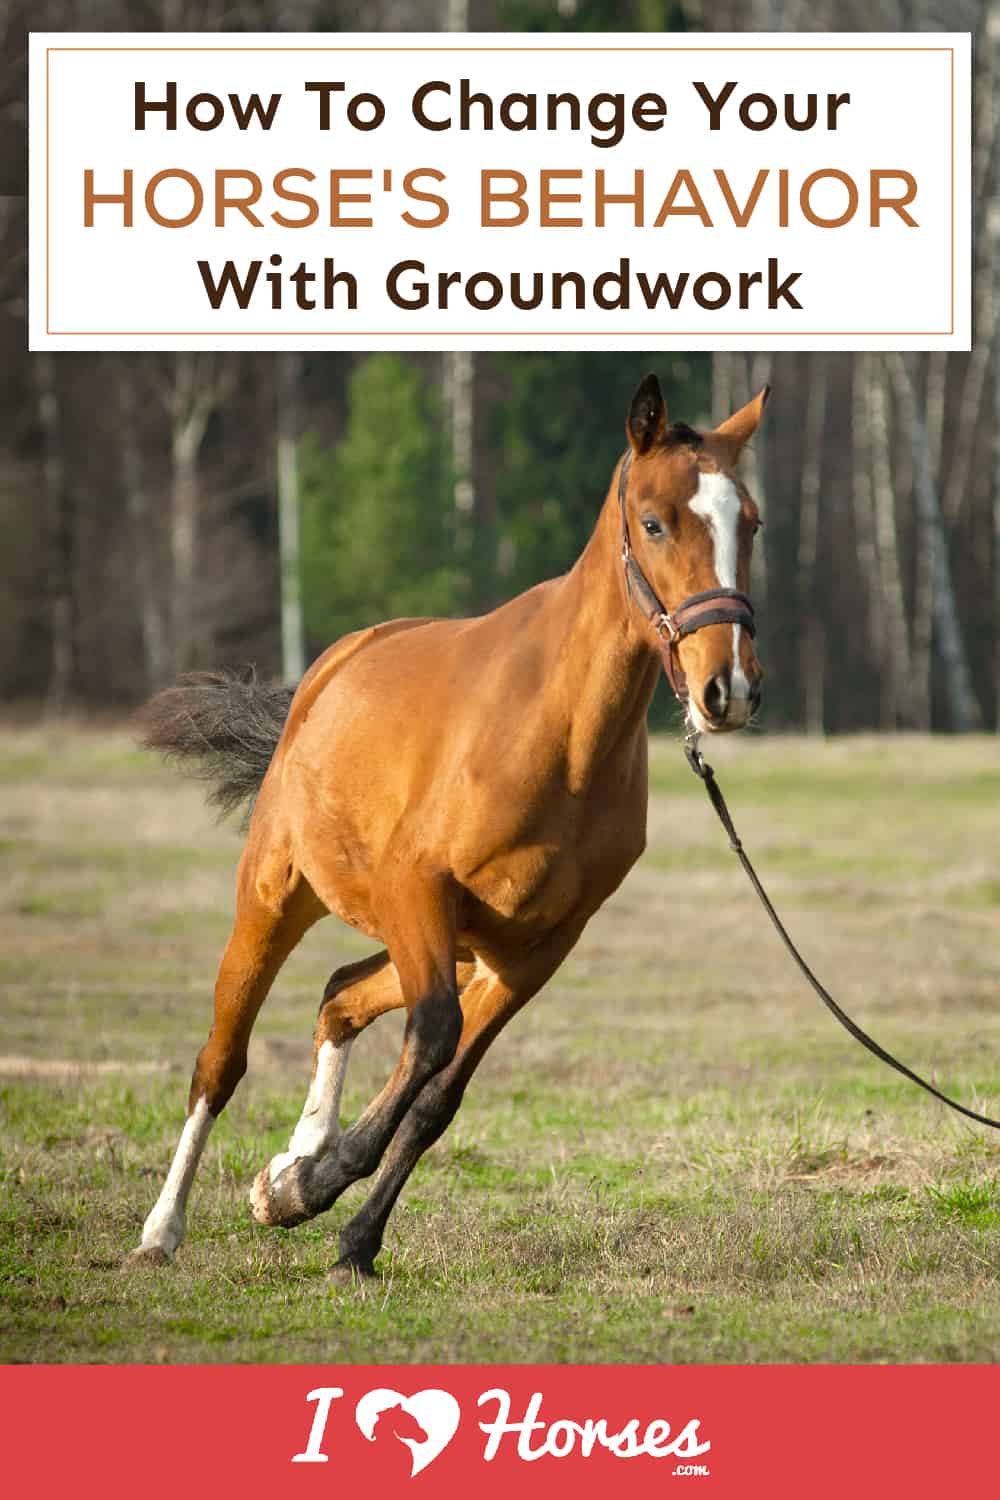 How To Use Groundwork To Change Horse Behavior